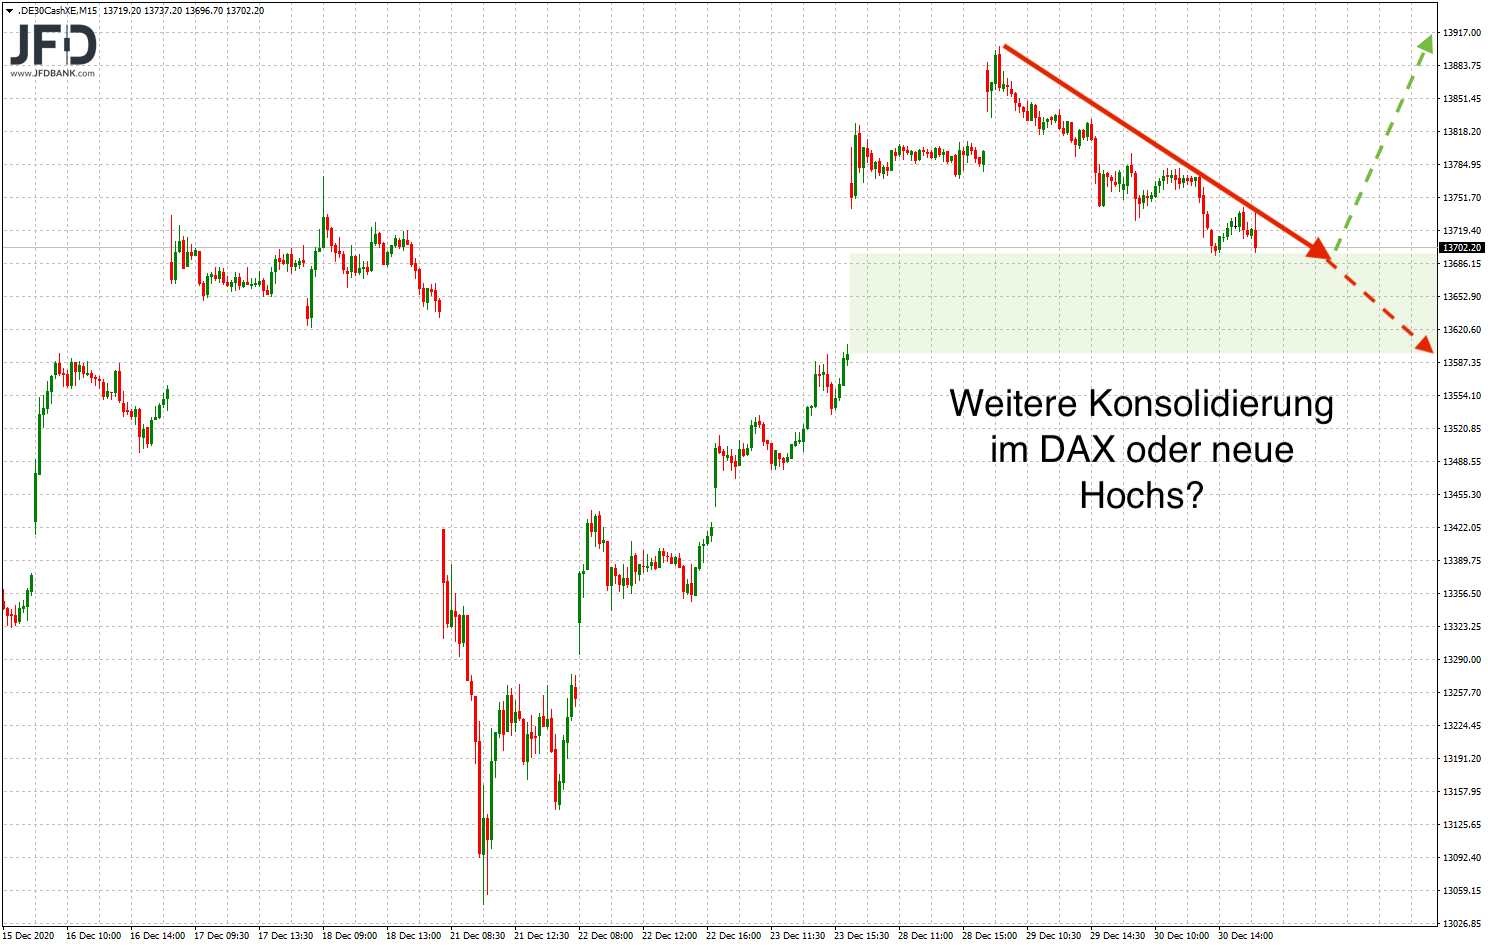 20210103_dax_teaser_kw01.png